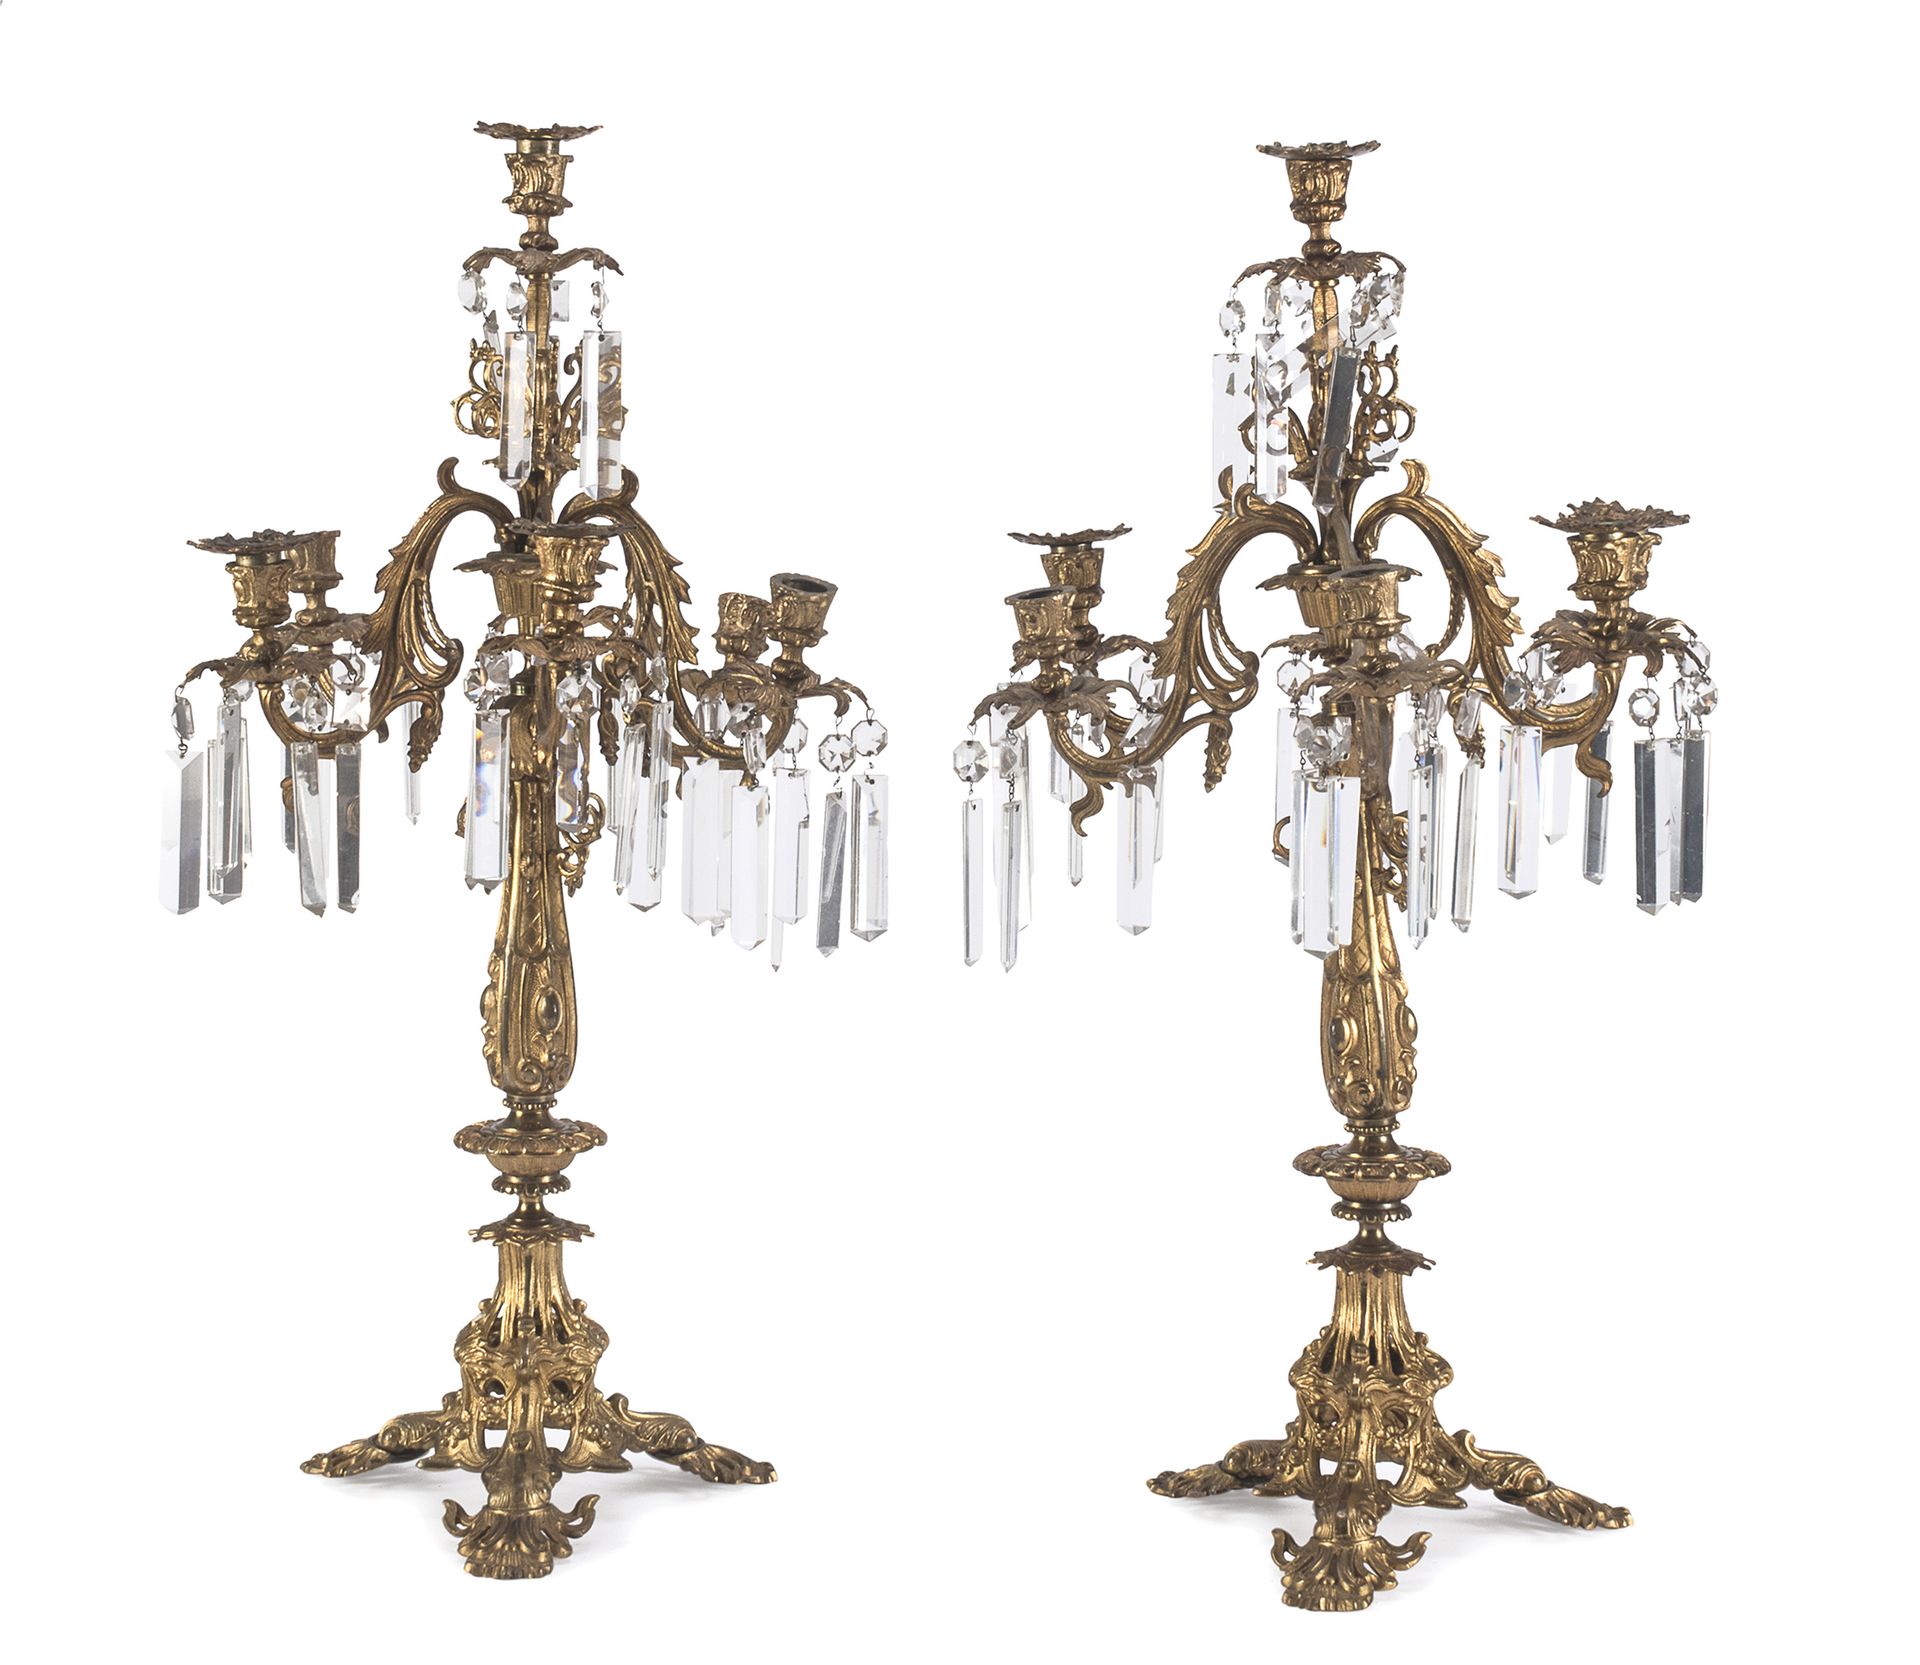 Null PAIR OF GILDED BRONZE CANDLESTICKS 19TH CENTURY